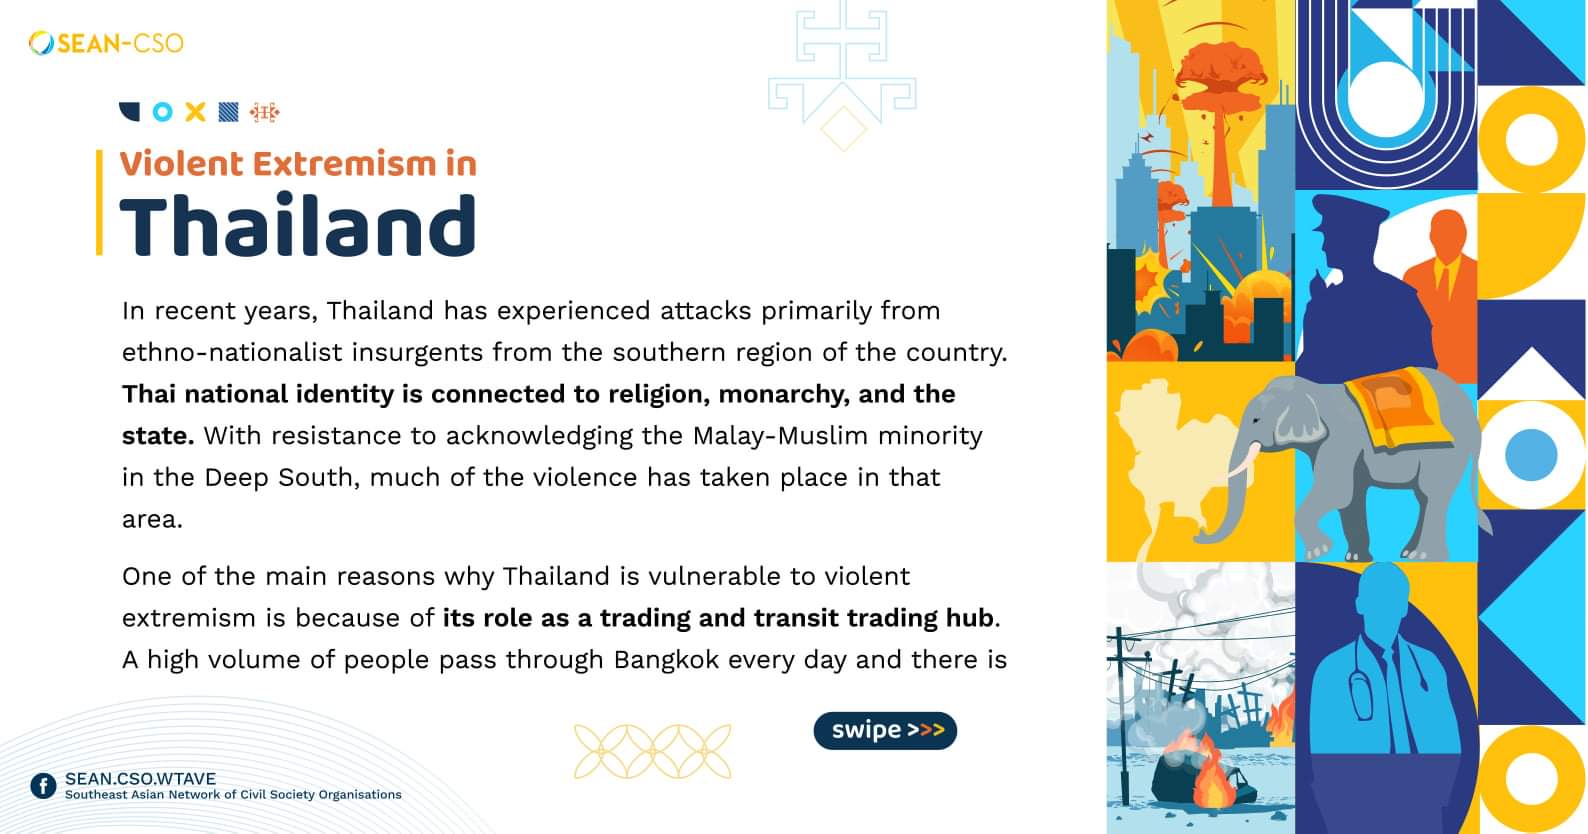 Motives and Behaviours of Violent Extremist Groups in Southeast Asia: Violent Extremism in Thailand